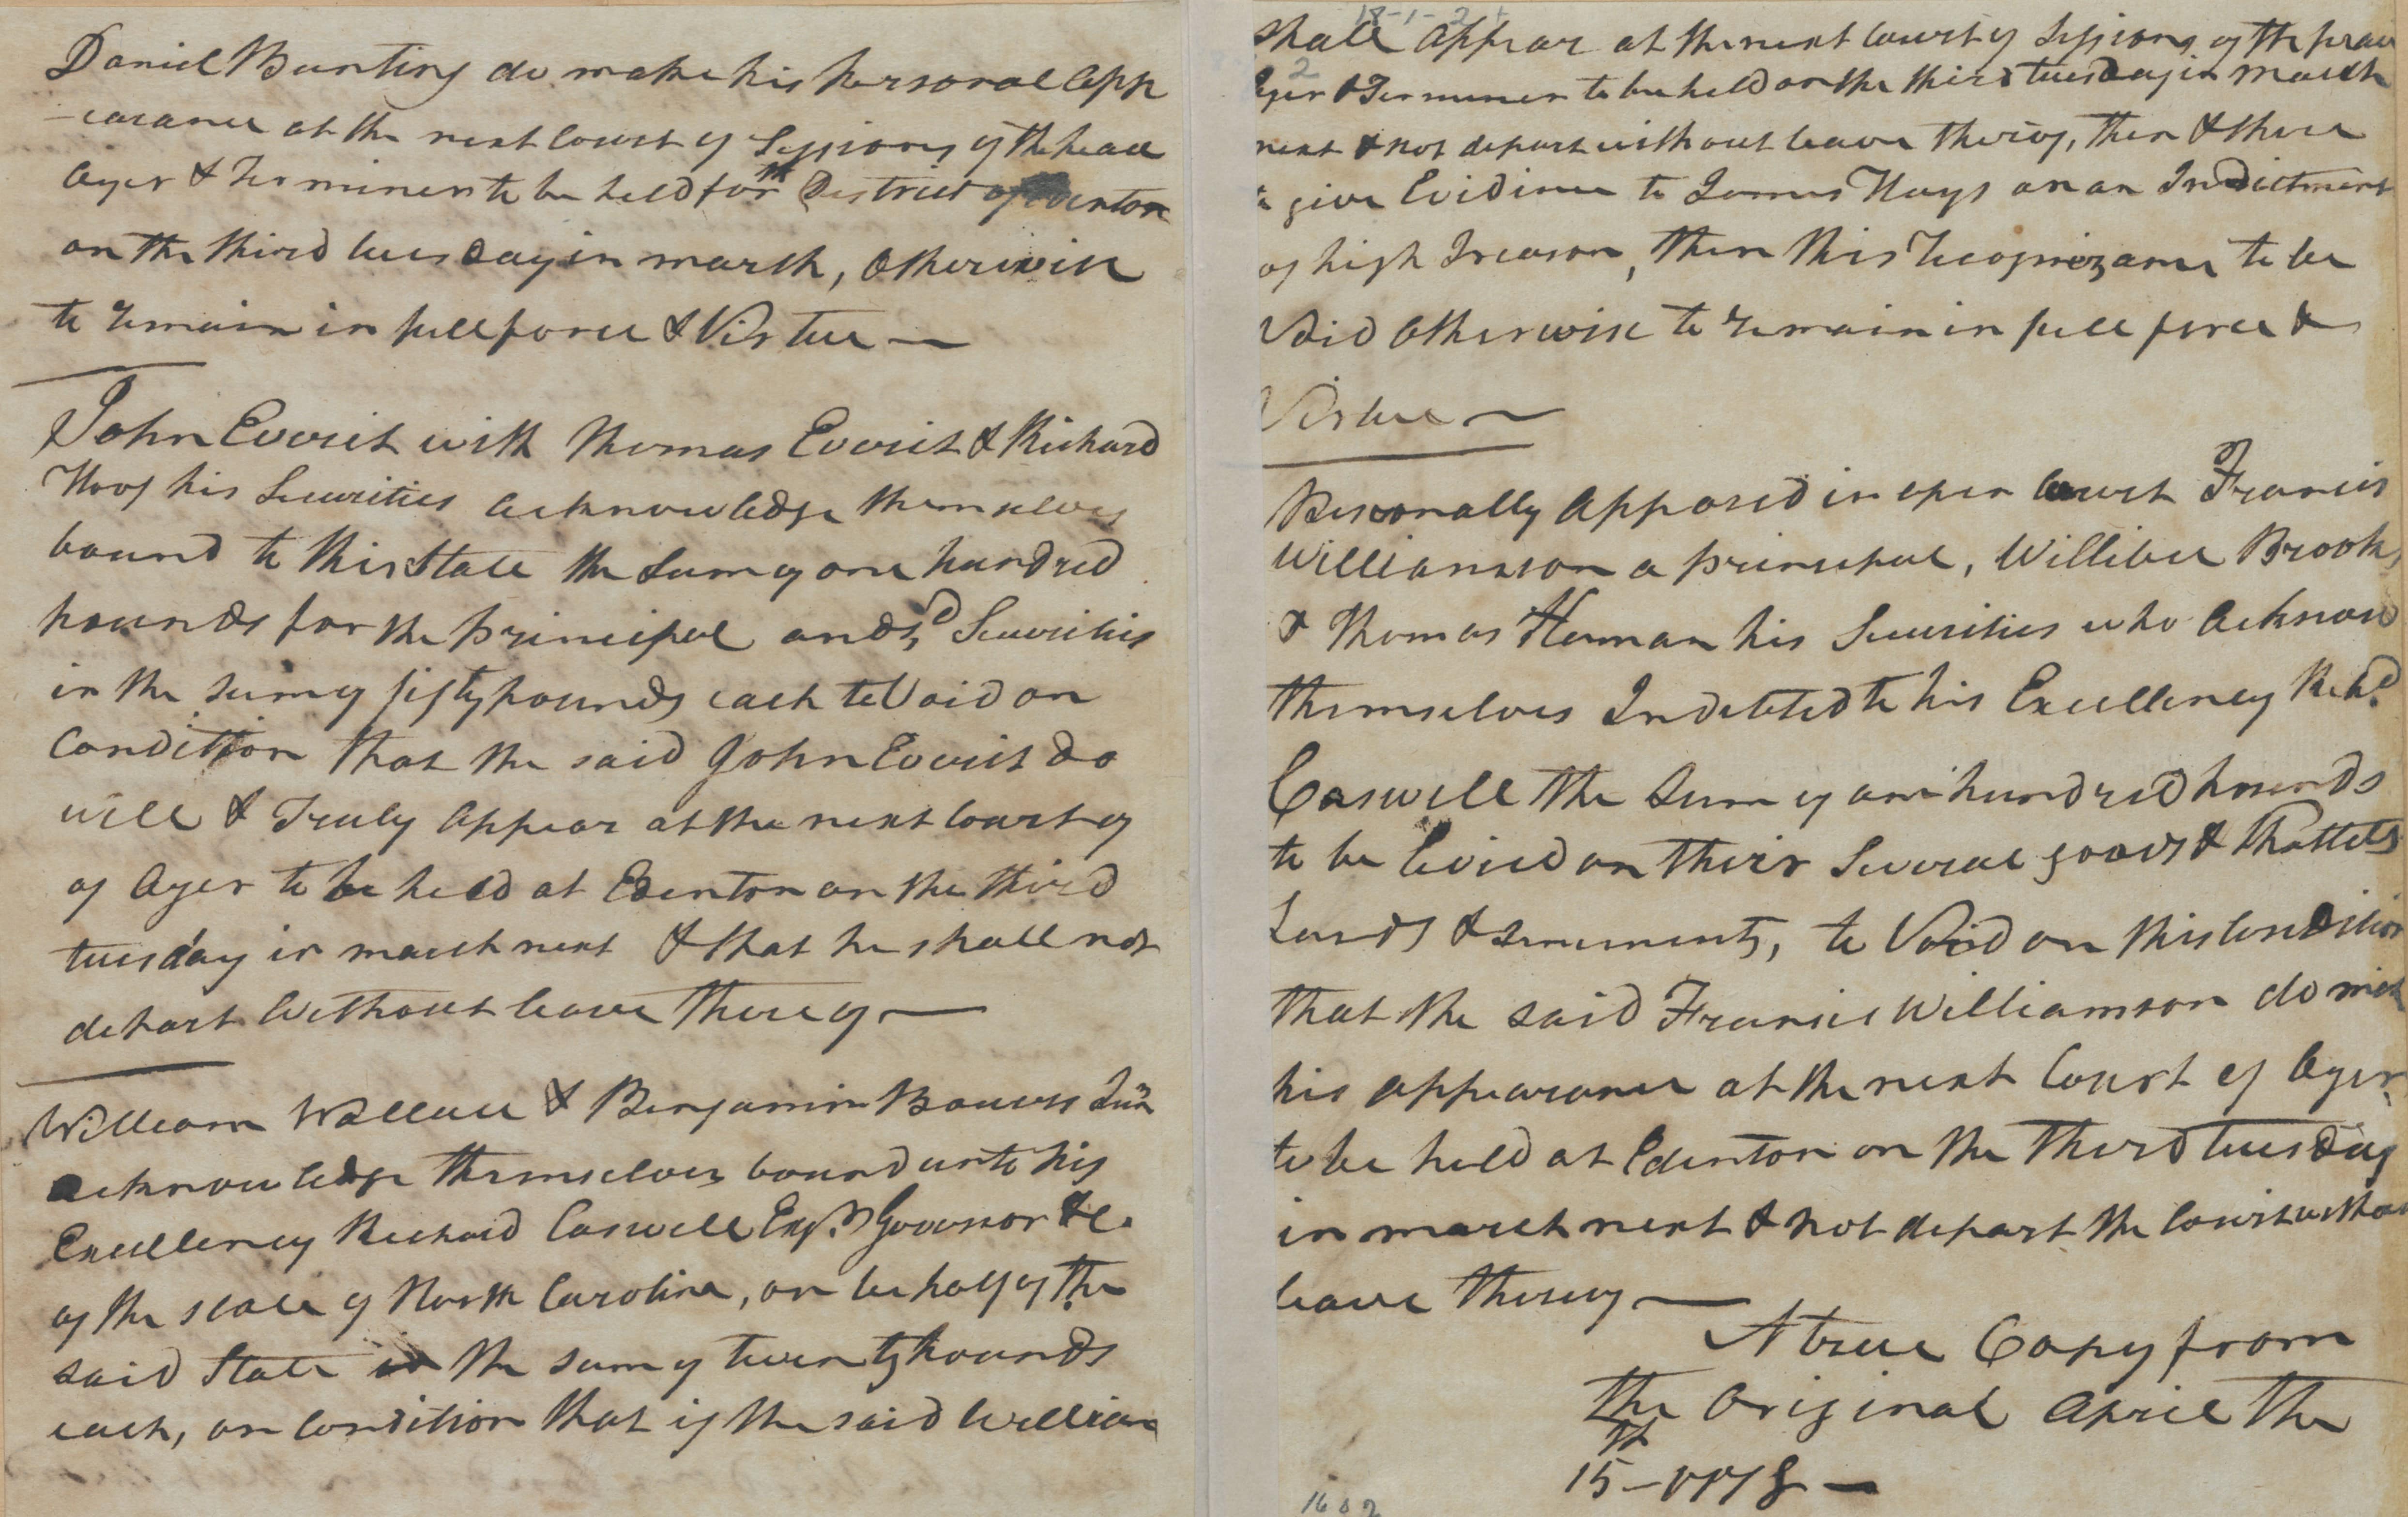 Bond from the Edenton District Court for James Harrison, Daniel Bunting, et. al., circa 10 October 1777, page 2